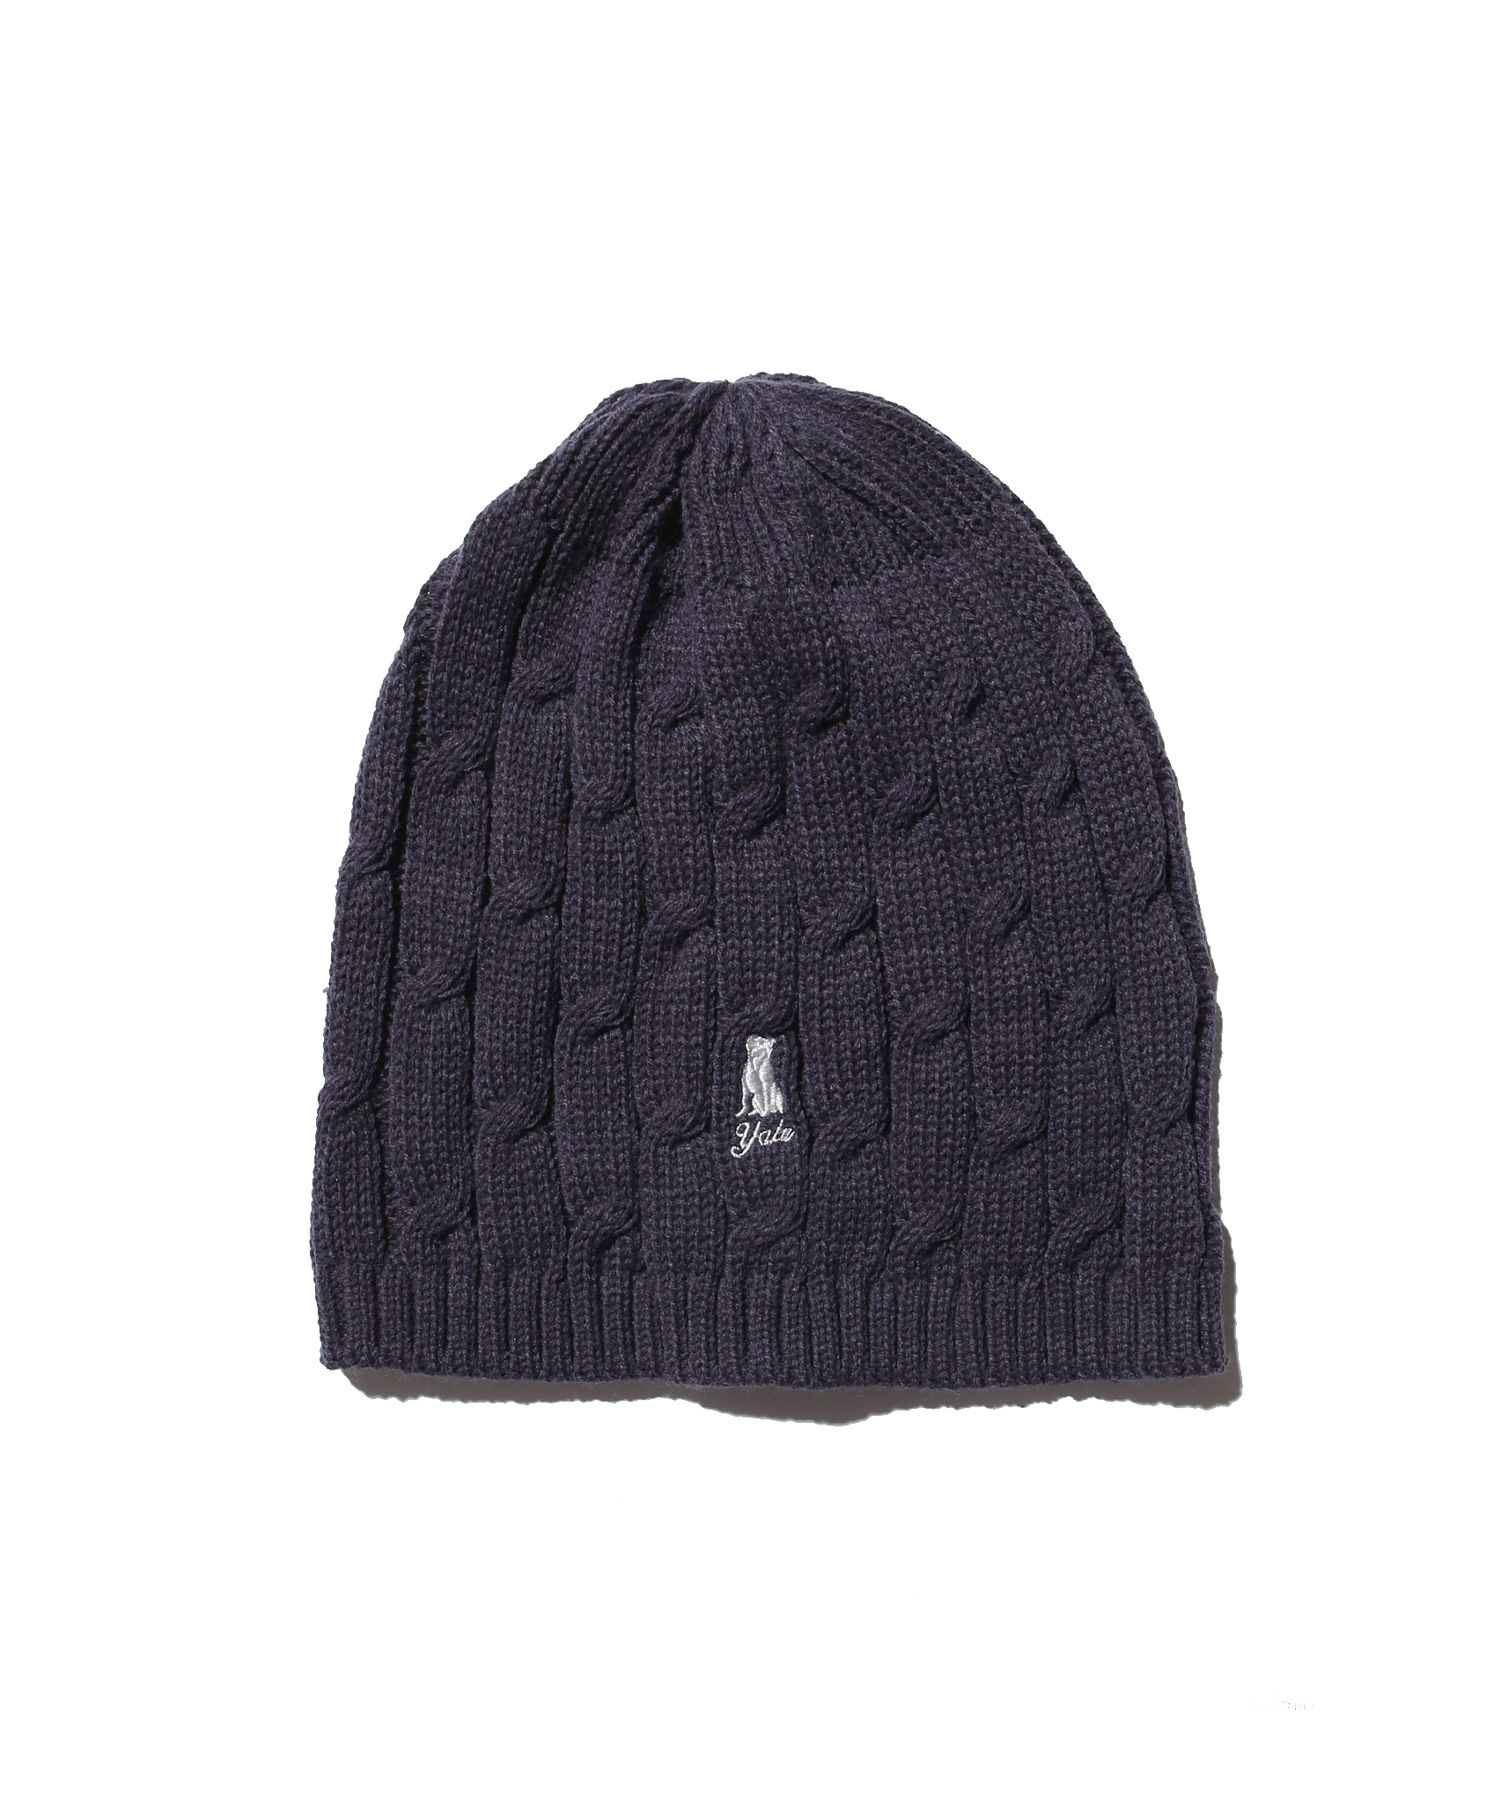 HERITAGE UNIVERSITY DAN CABLE BEANIE CHARCOAL